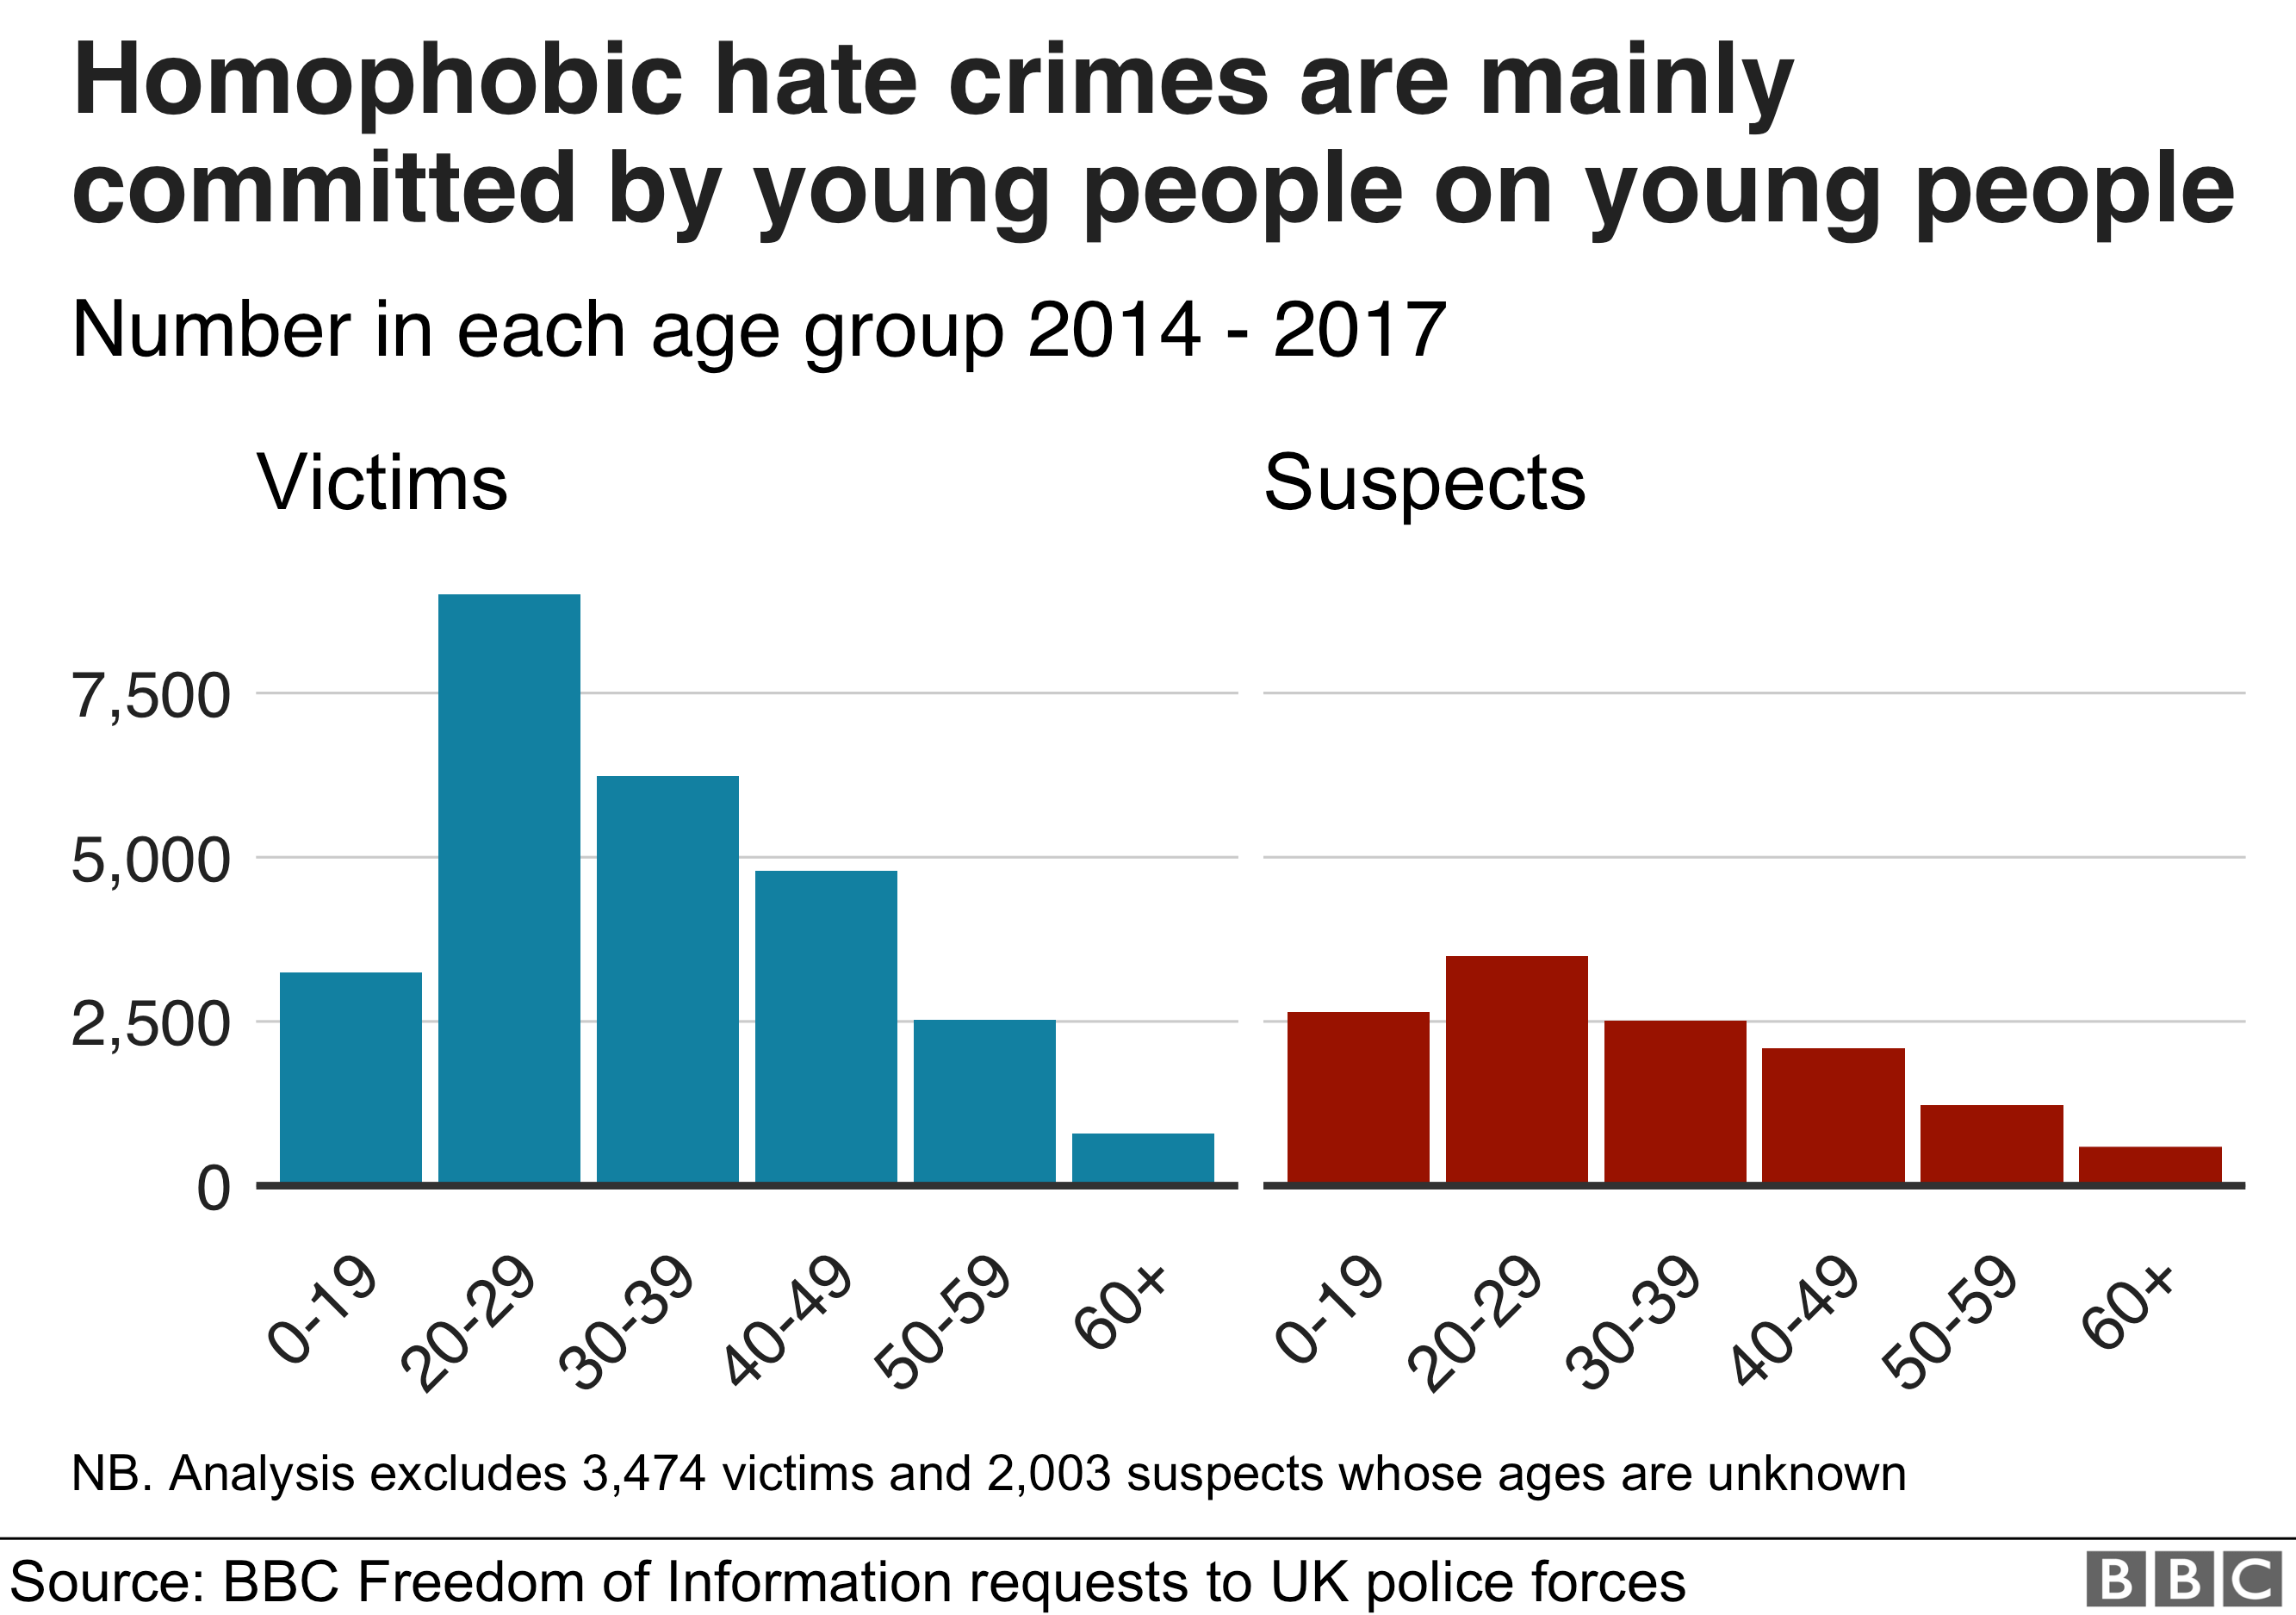 How LGBTQ crime is committed by young people against young people